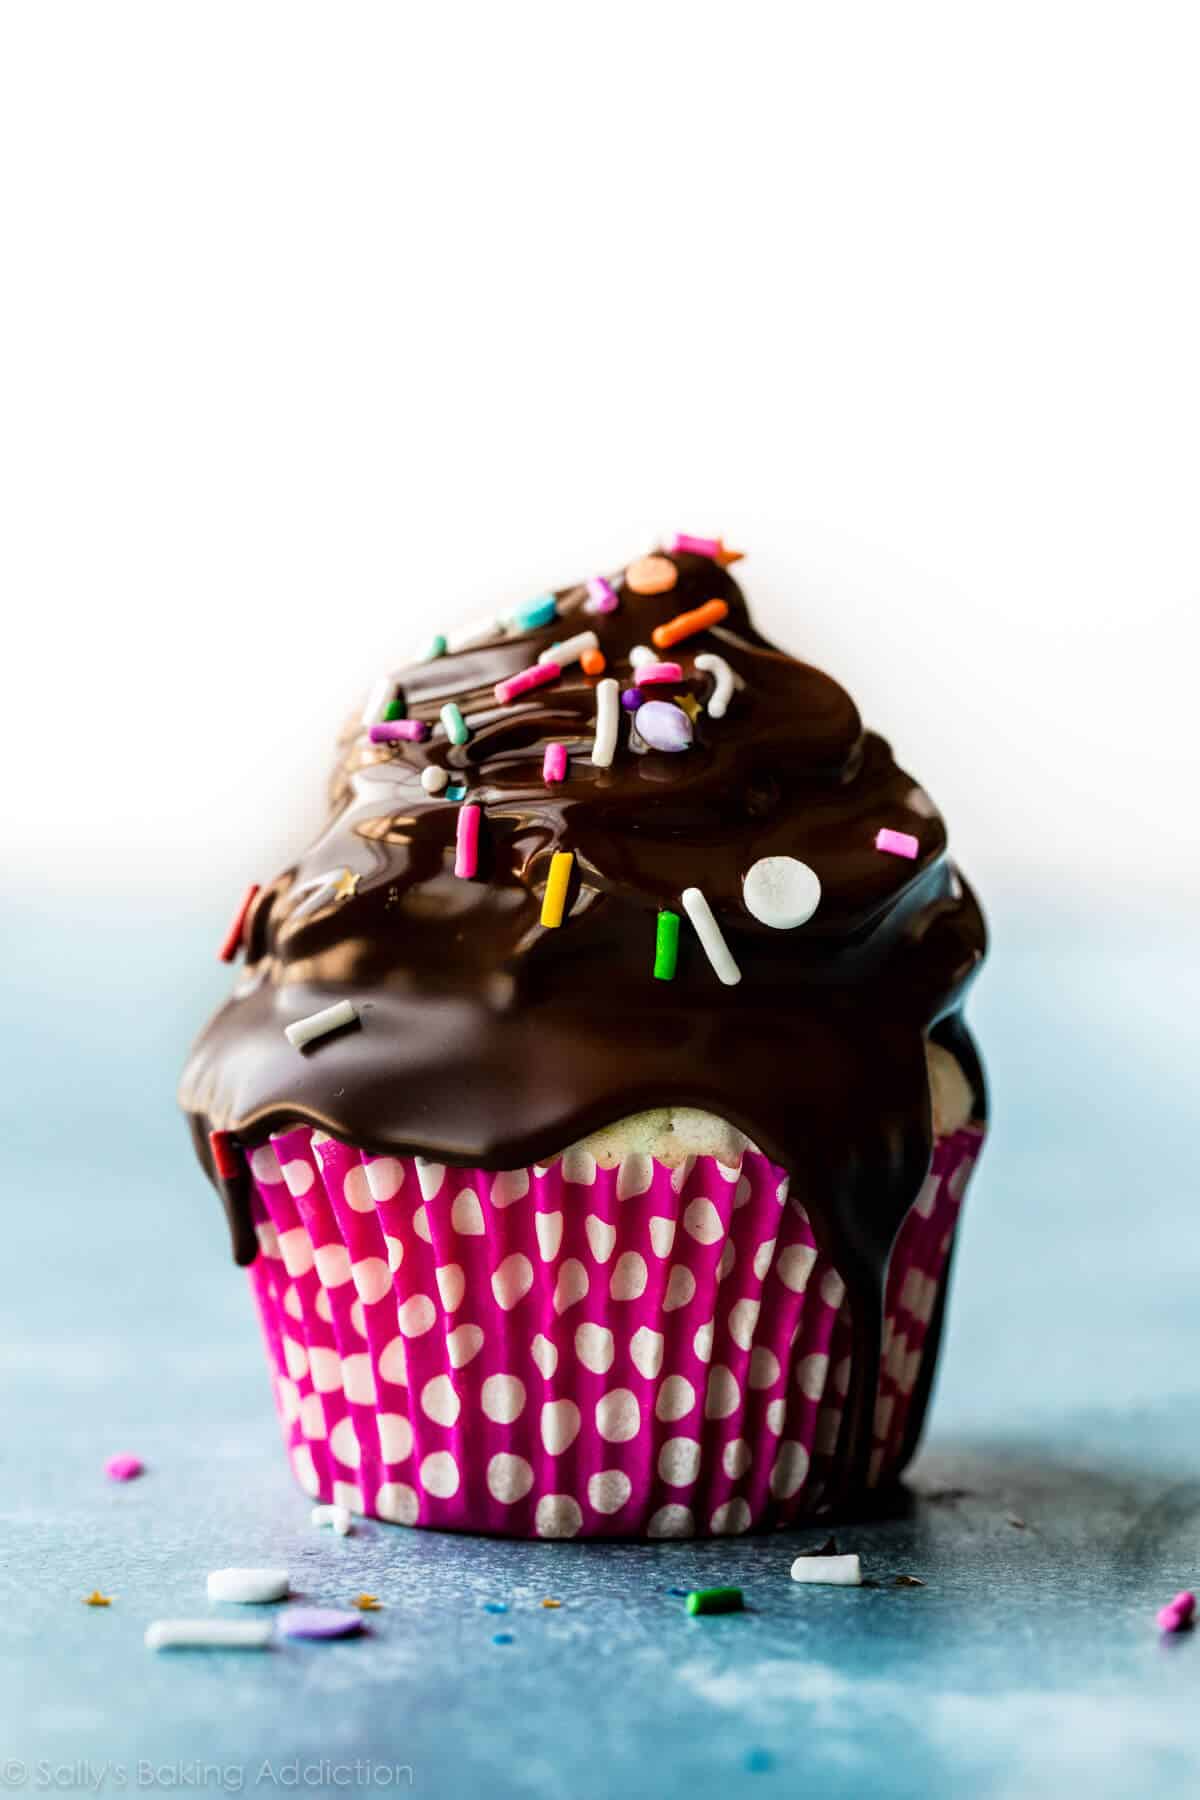 birthday cupcake dipped in chocolate coating and topped with sprinkles